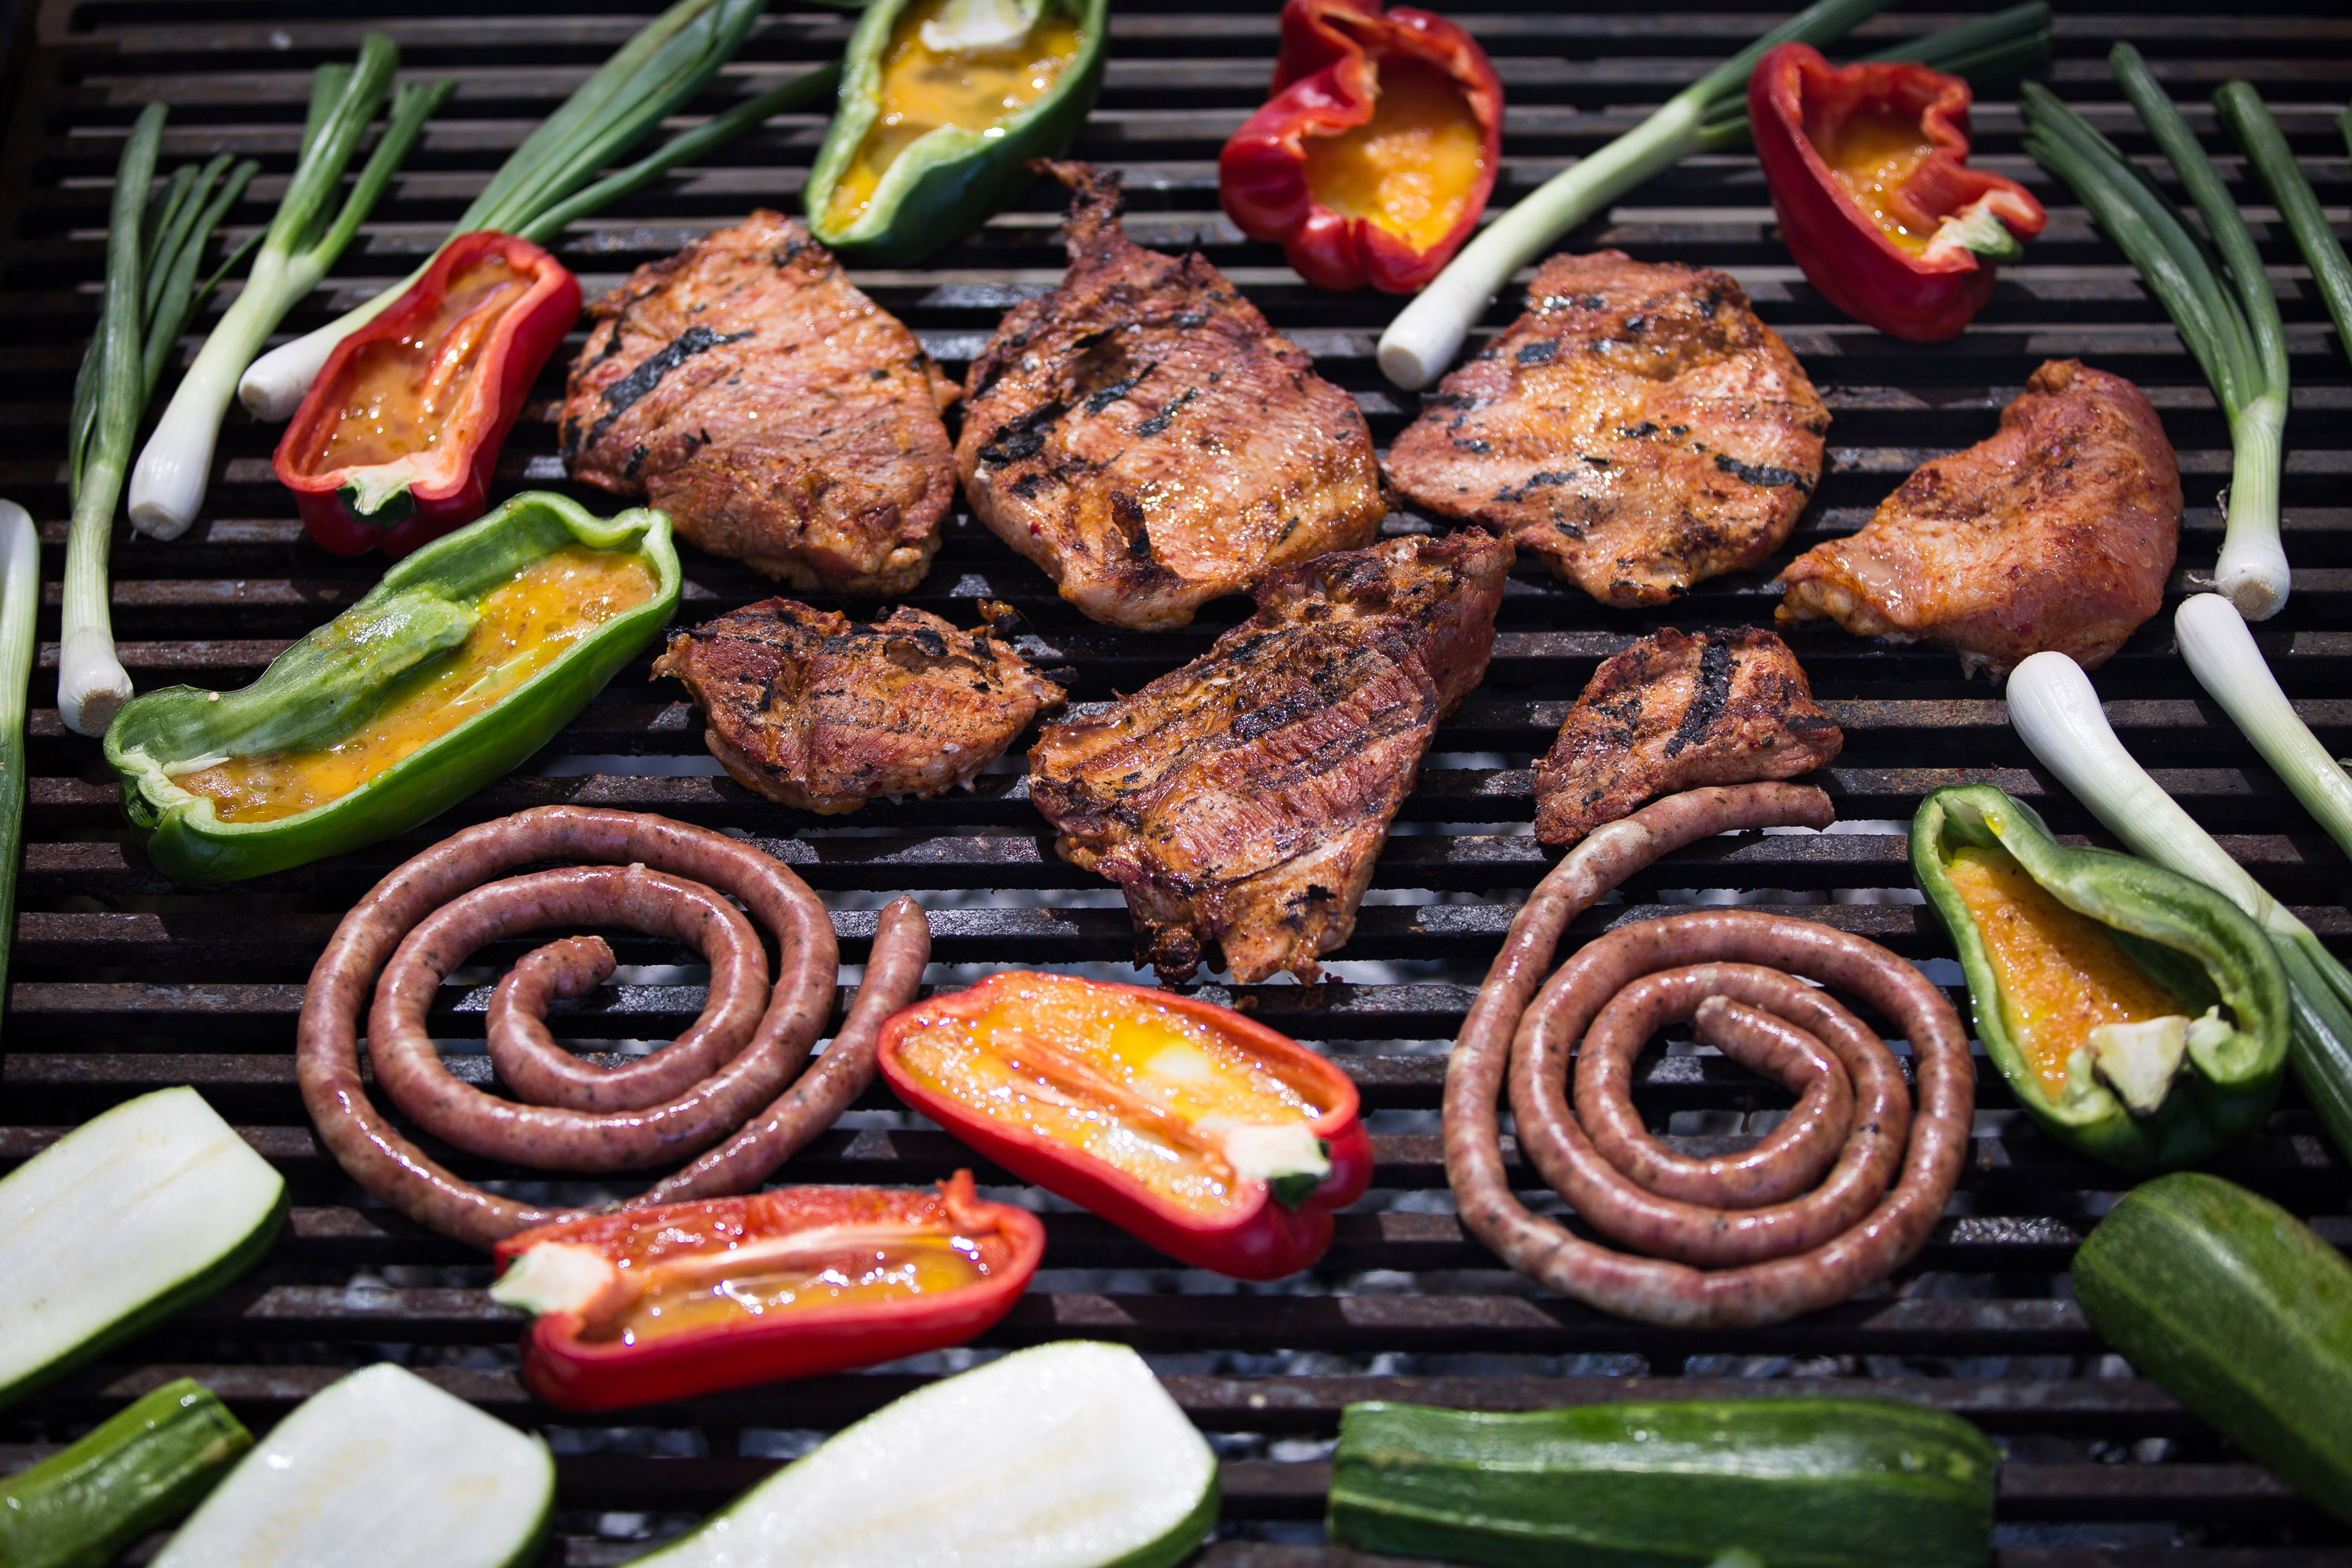 Meat and vegetables on the grill snapped by Nils Kingston during an asado at the winery.